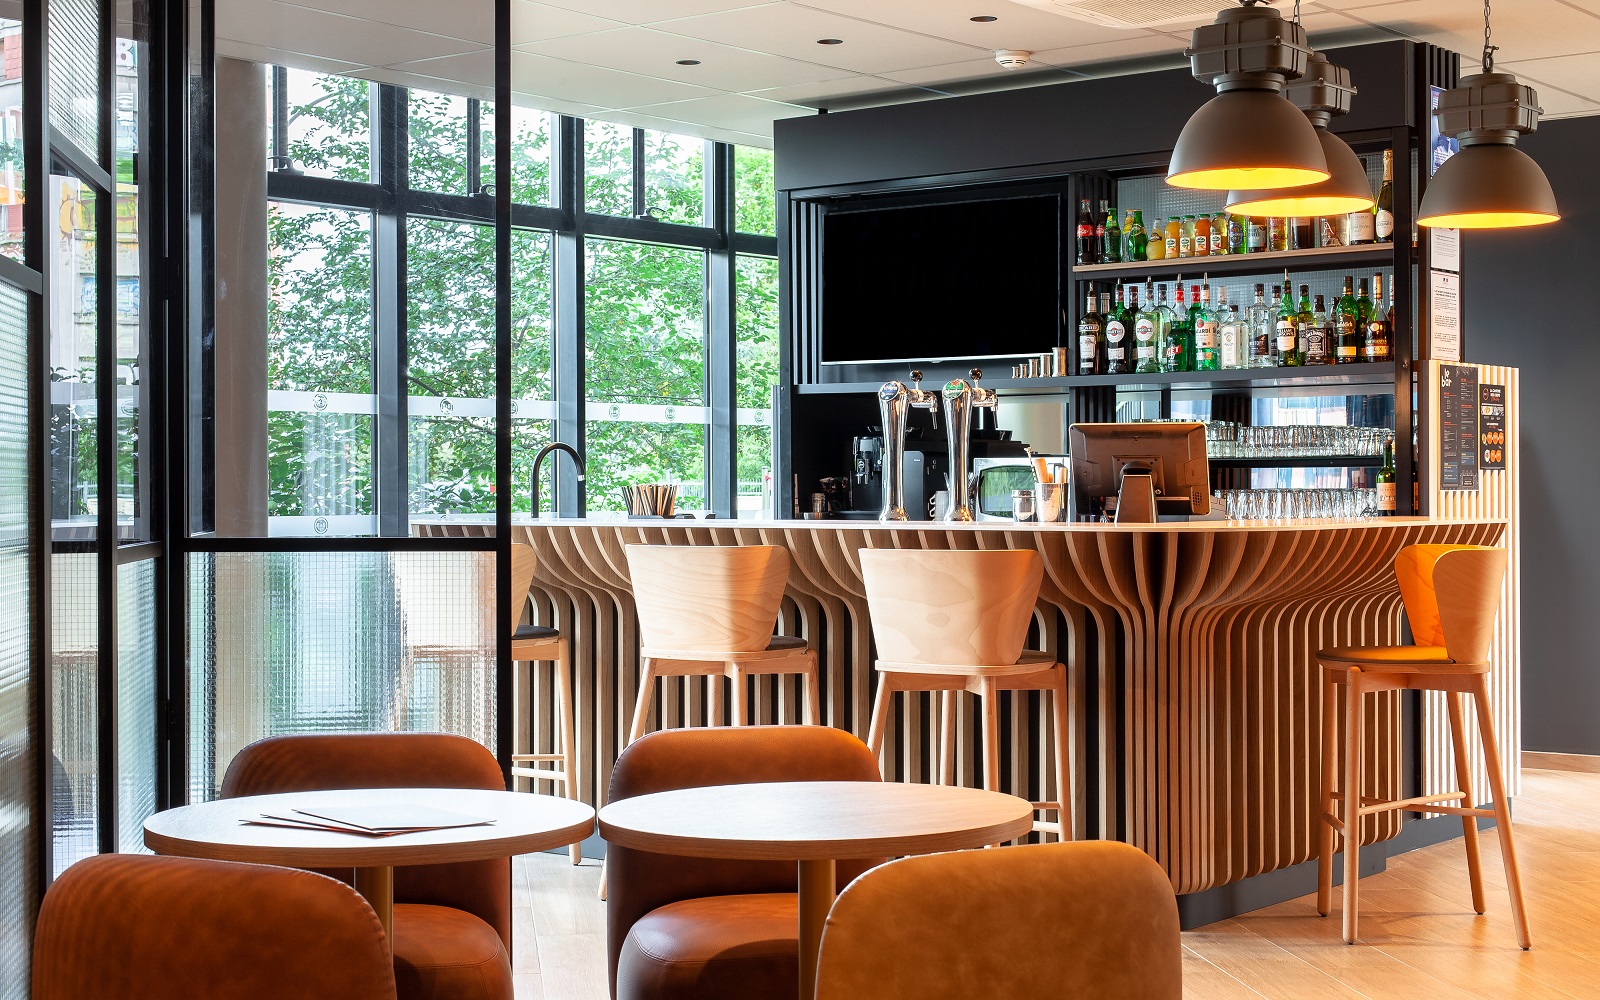 bar with wooden chairs and industrial style lighting in B&B HOTELS Paris